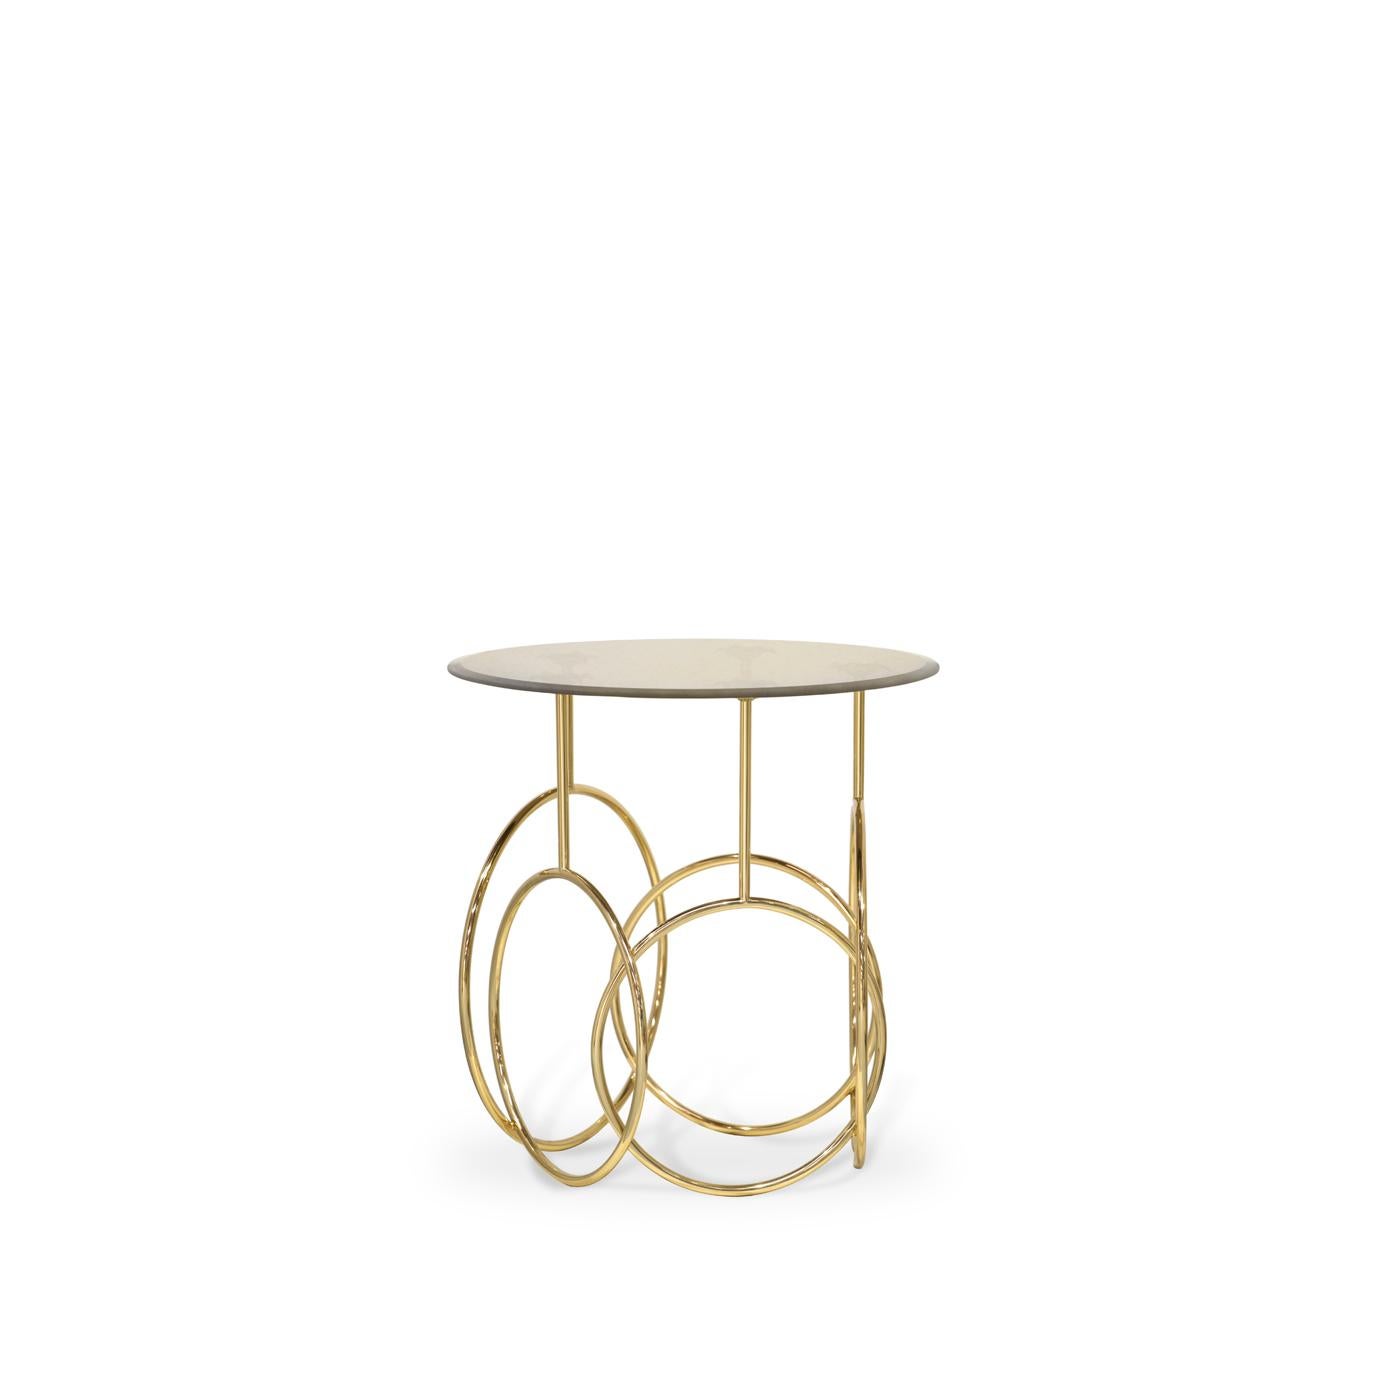 The Kiki side table evokes the romantic and seductive beauty of Parisian cabaret life. The revealing frilled undergarments, the surprise high kicks, the mesmerizing hoops accompanied by blinding splendor give this table a sassy new spin on design.